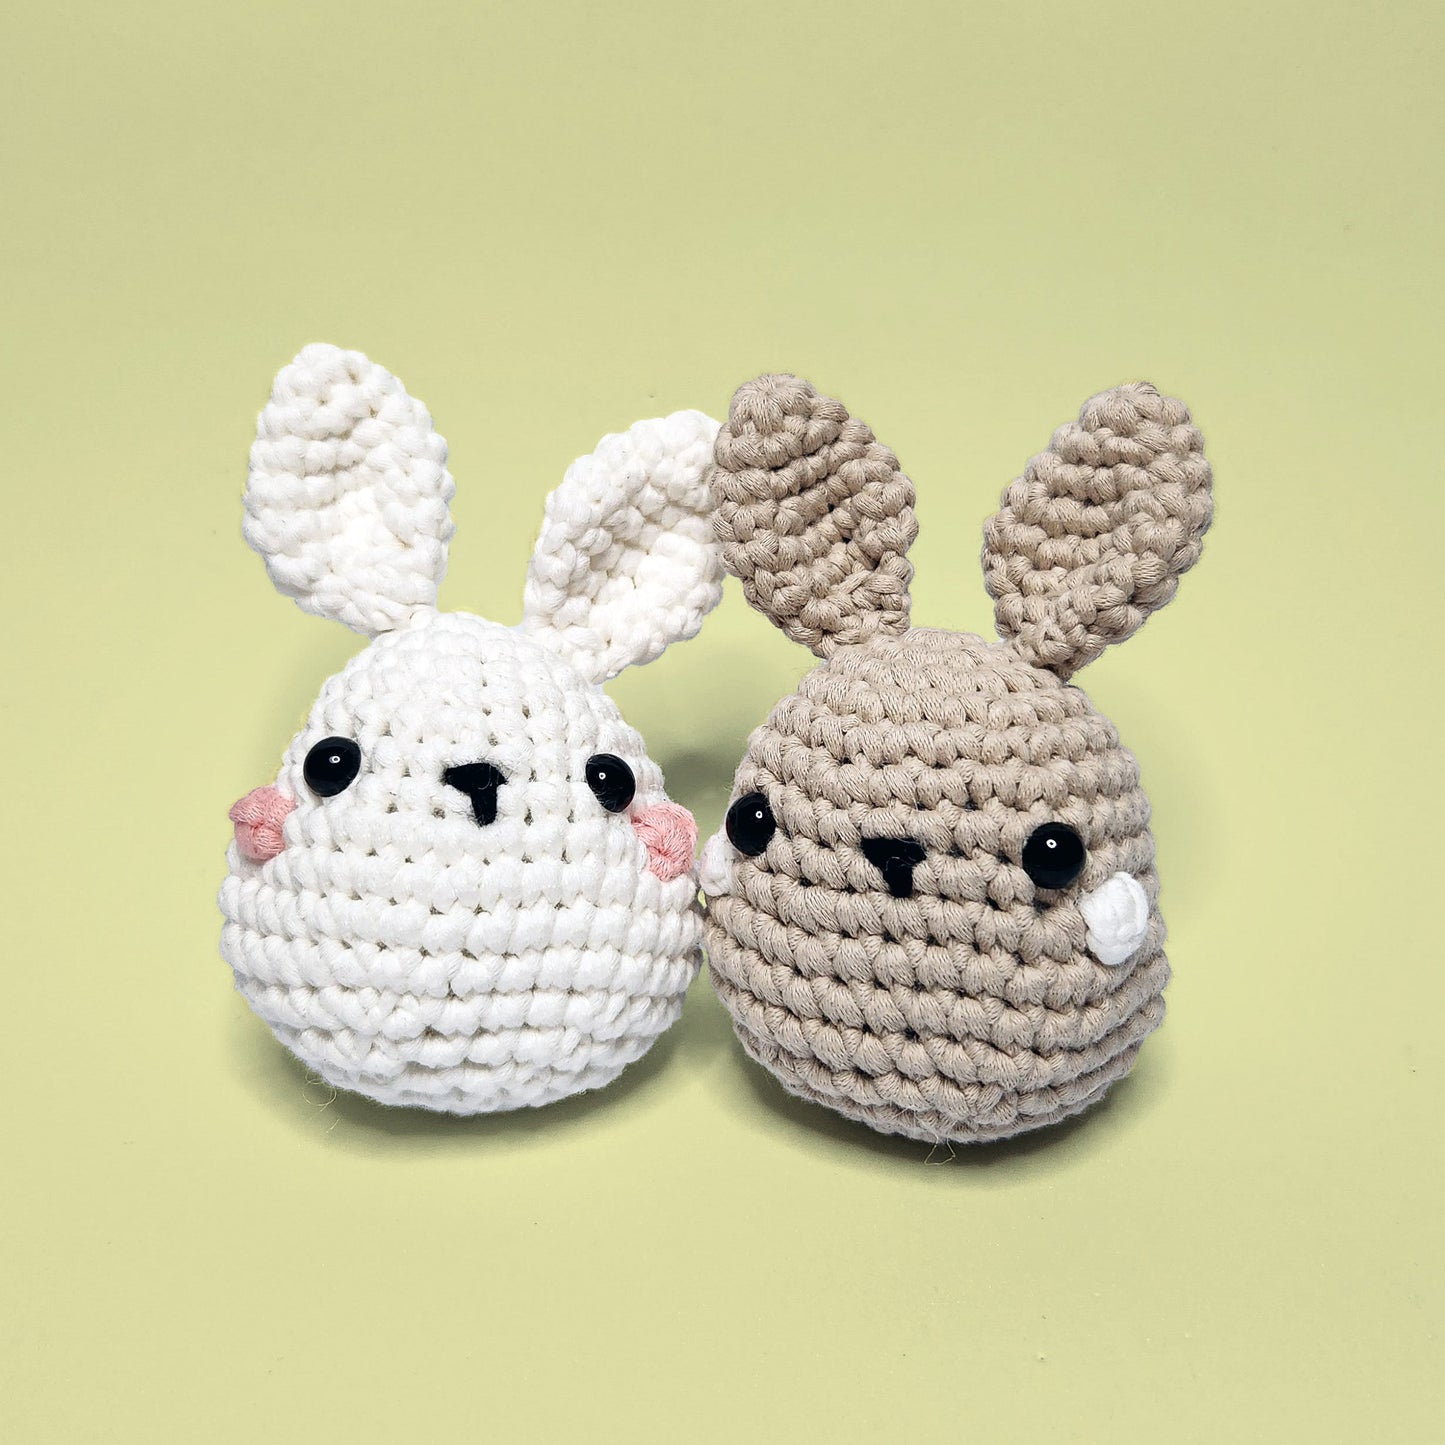 Two adorable crochet bunnies, one brown and white, side by side. These are completed projects from our beginner-friendly crochet kit. Handmade with our yarn, perfect for people who are looking to learn crocheting.